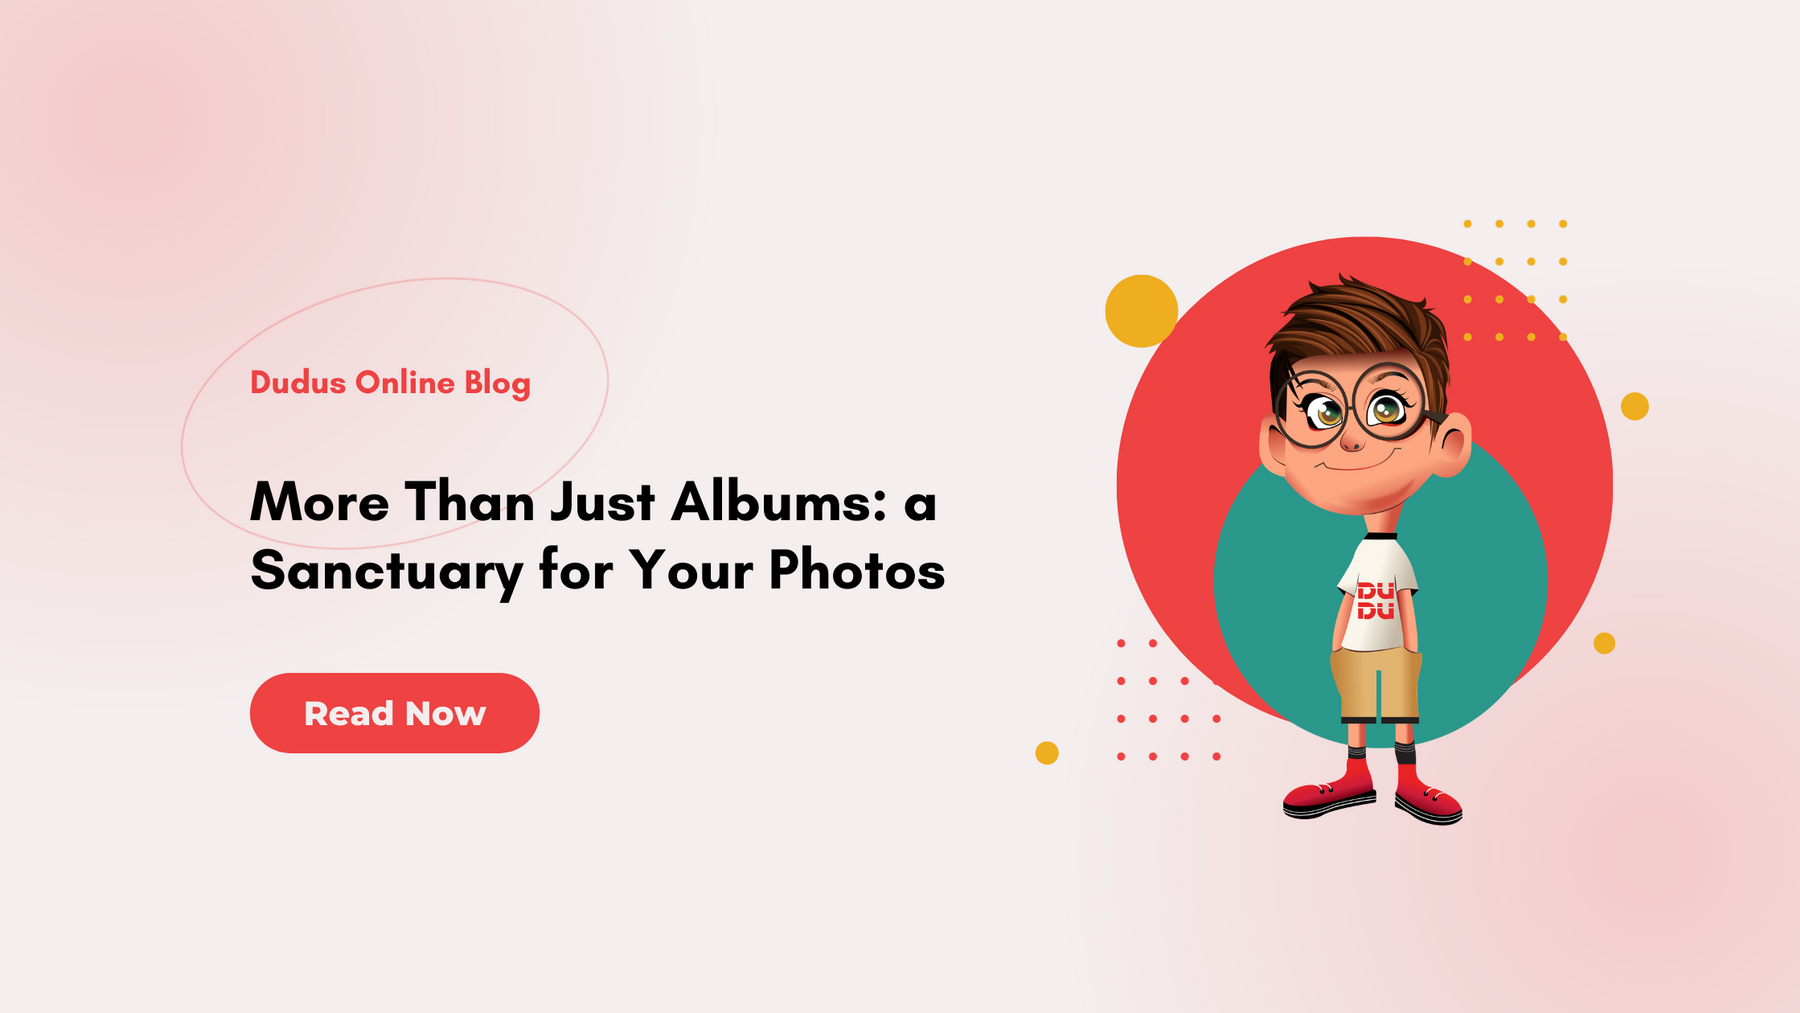 More Than Just Albums: a Sanctuary for Your Photos